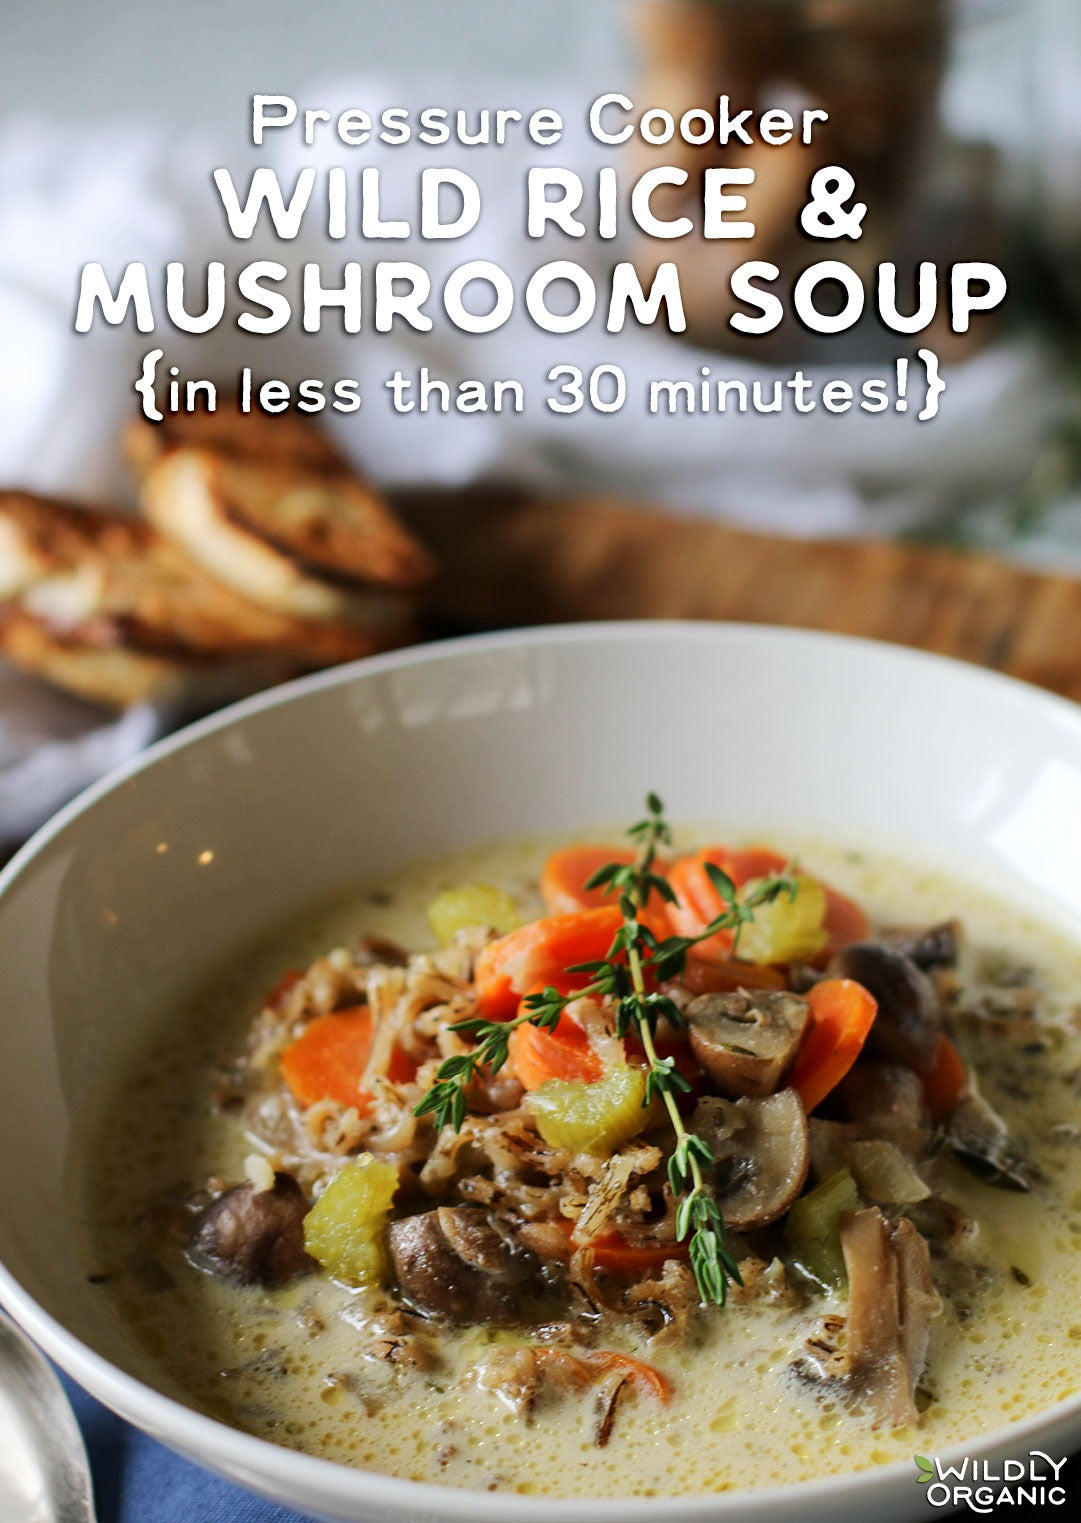 Do you struggle with getting nutritious meals on the table quickly? Sometimes it's so tempting to whip out that blue box of mac 'n cheese and call it good. Before you do, try this nutrient-dense Pressure Cooker Wild Rice and Mushroom Soup. Loaded with veggies, real wild rice, and gut-healthy bone broth, it cooks in less than 30 minutes in your pressure cooker!